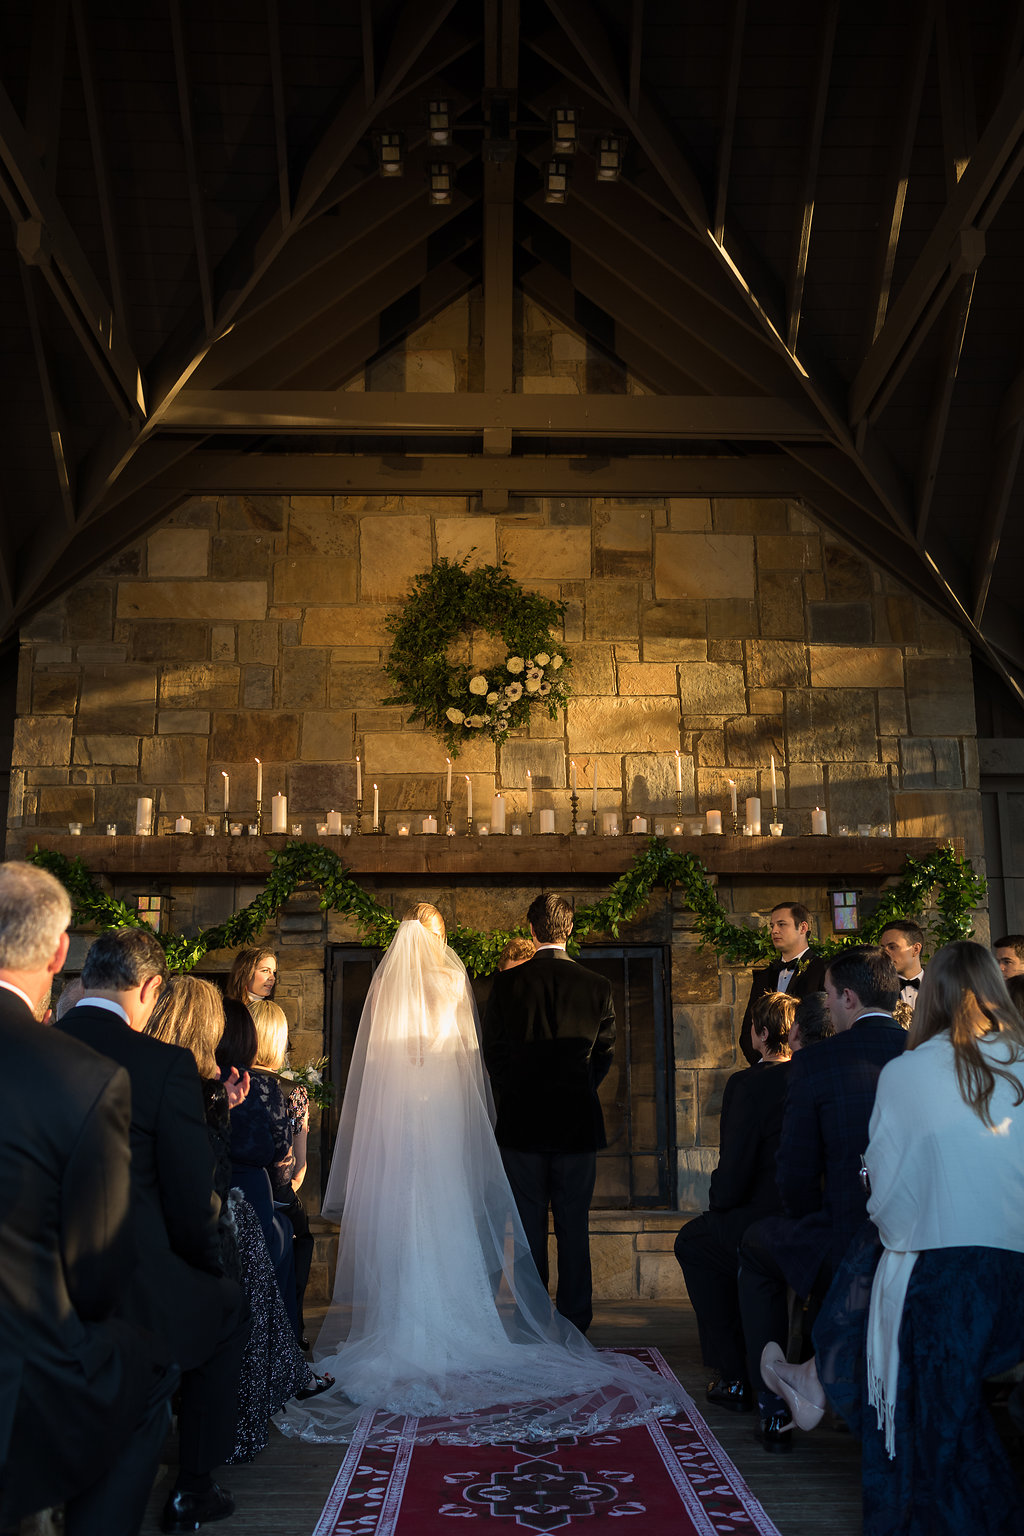 December Wedding at Blackberry Farm with all white and greenery florals // Wedding Ceremony at Yallerhammer Pavillion // Tennessee Florist // Rosemary & Finch Floral Design